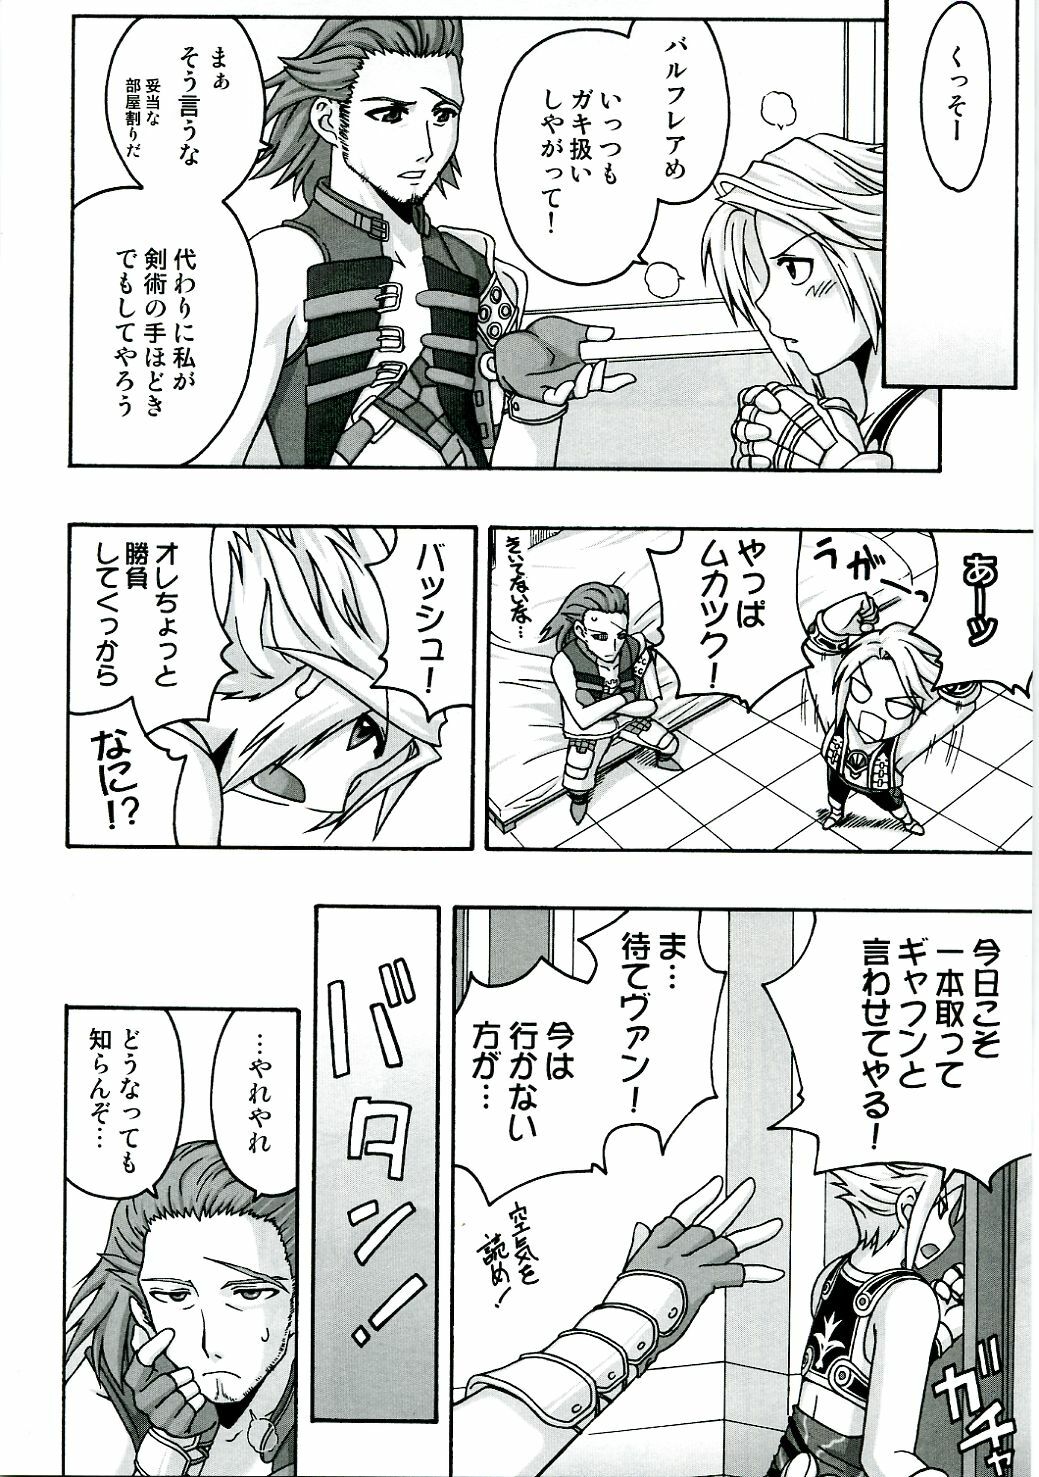 (C70) [FruitsJam (Mikagami Sou)] In The Room (Final Fantasy XII) page 3 full